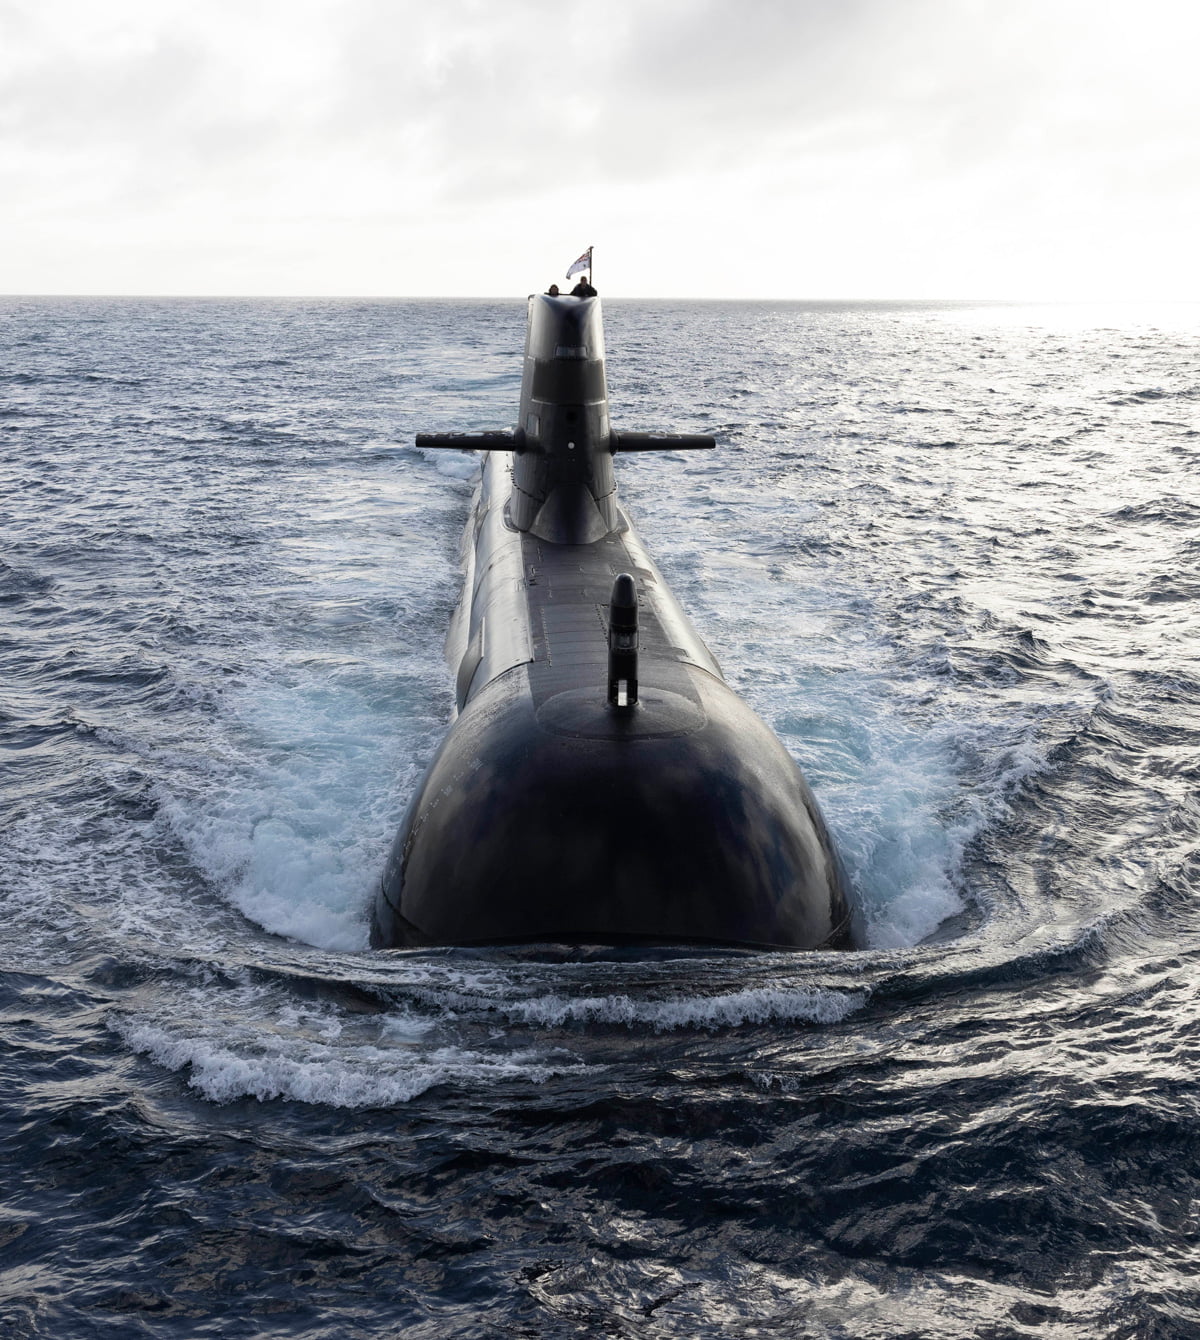 A submarine glides through the water on a sunny day, showcasing its sleek design and underwater capabilities.